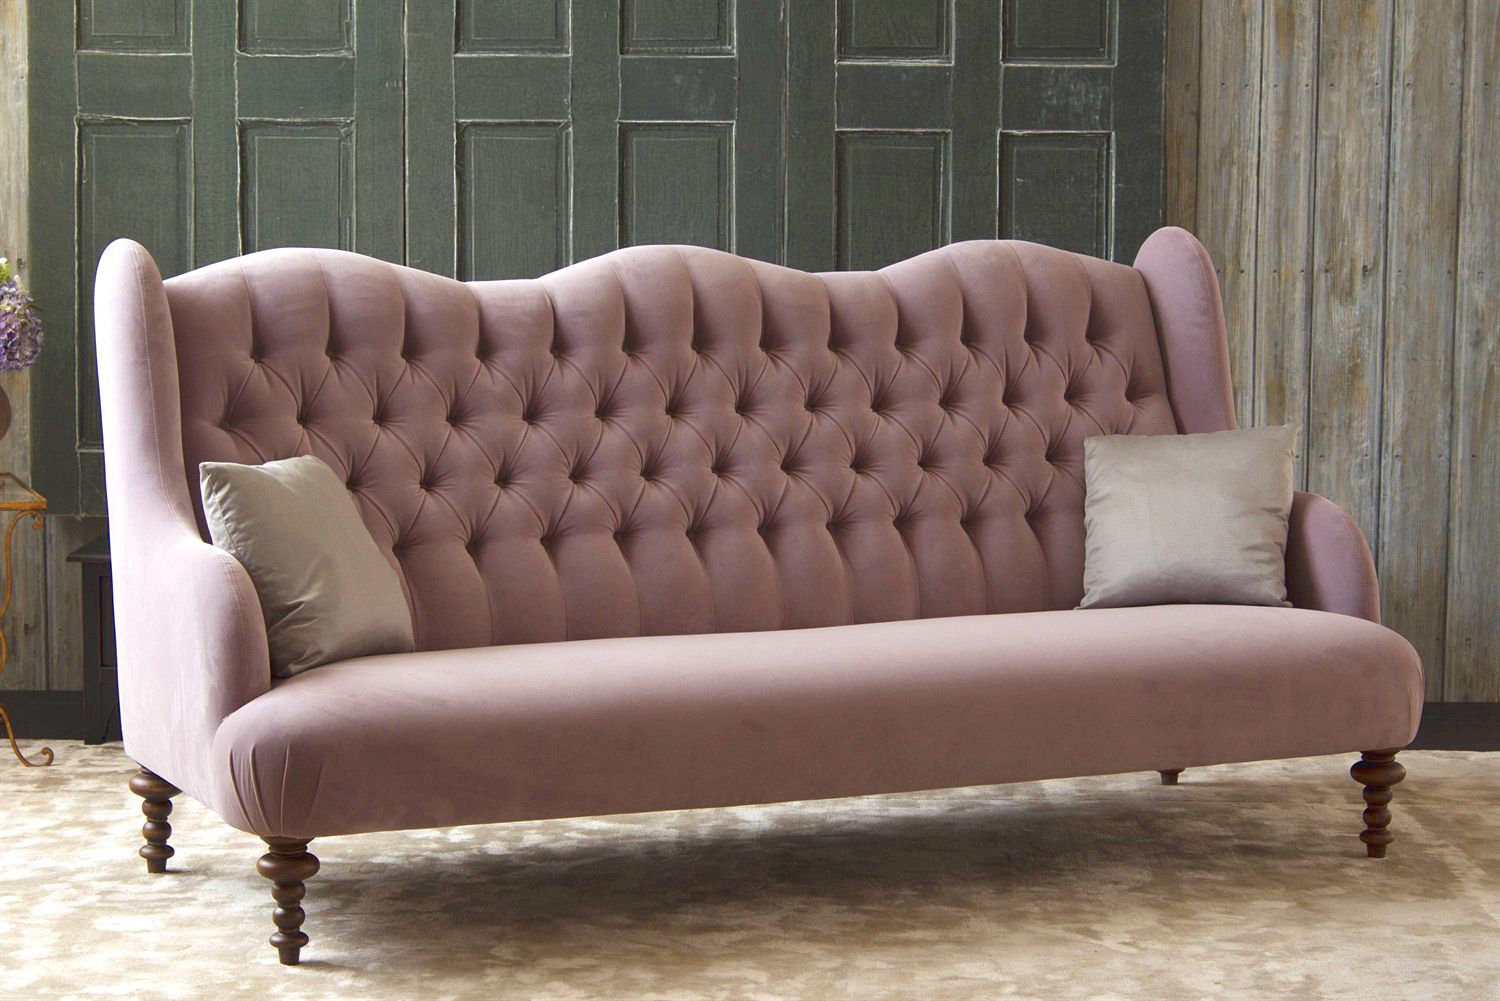 John Sankey Constantine Large Sofa | Kings Interiors Intended For Tate Ii Sofa Chairs (View 10 of 25)